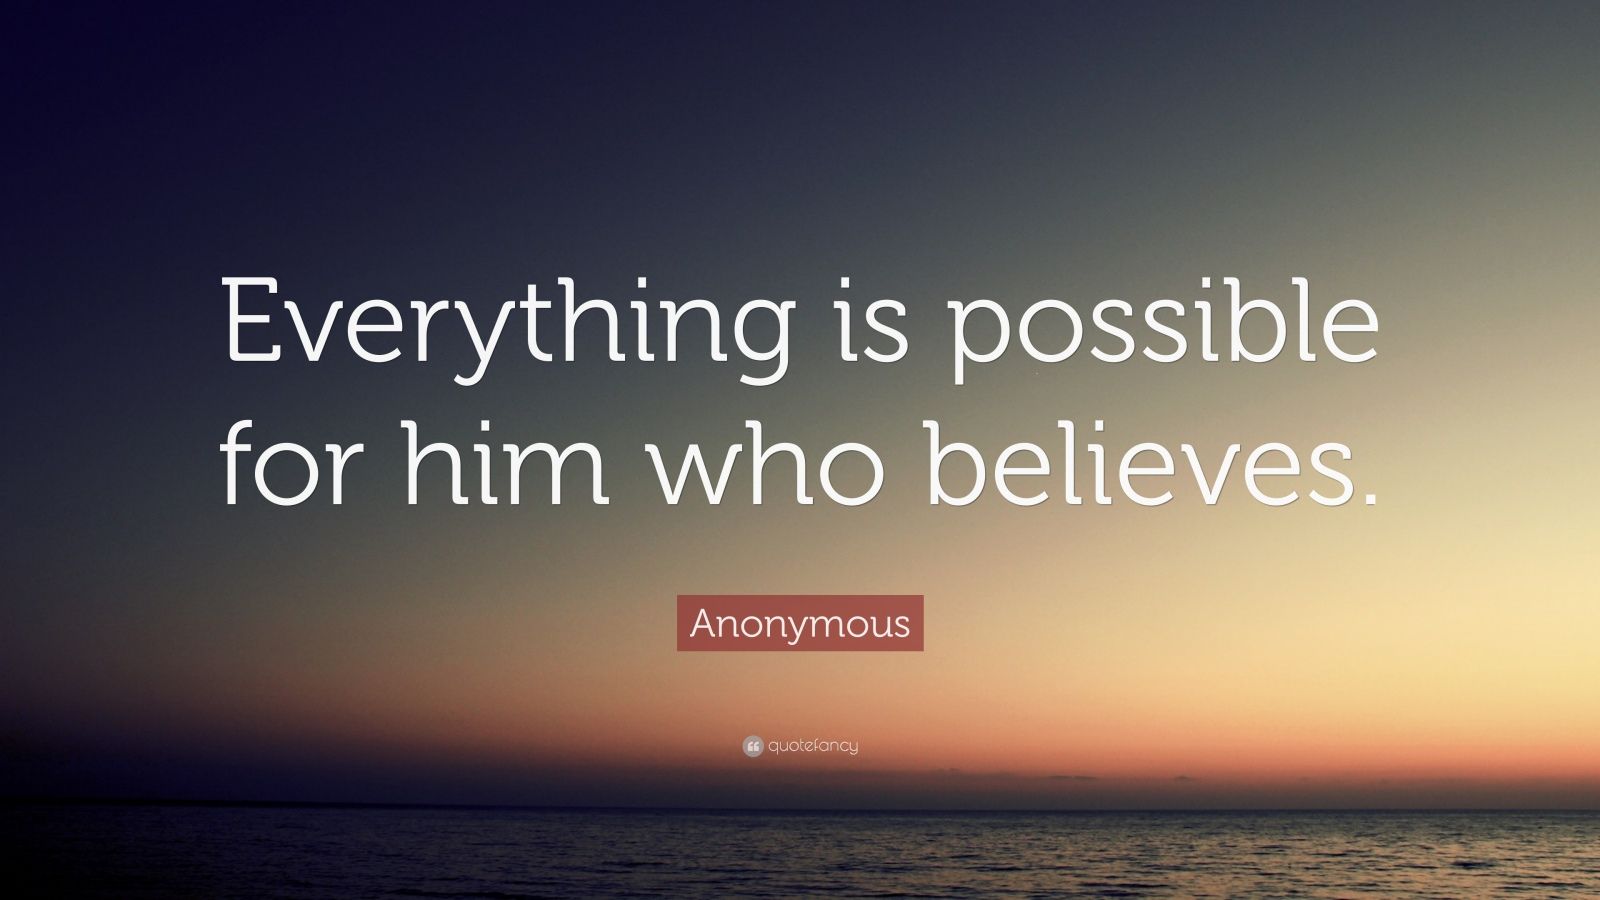 anonymous quote: "everything is possible for him who believes.